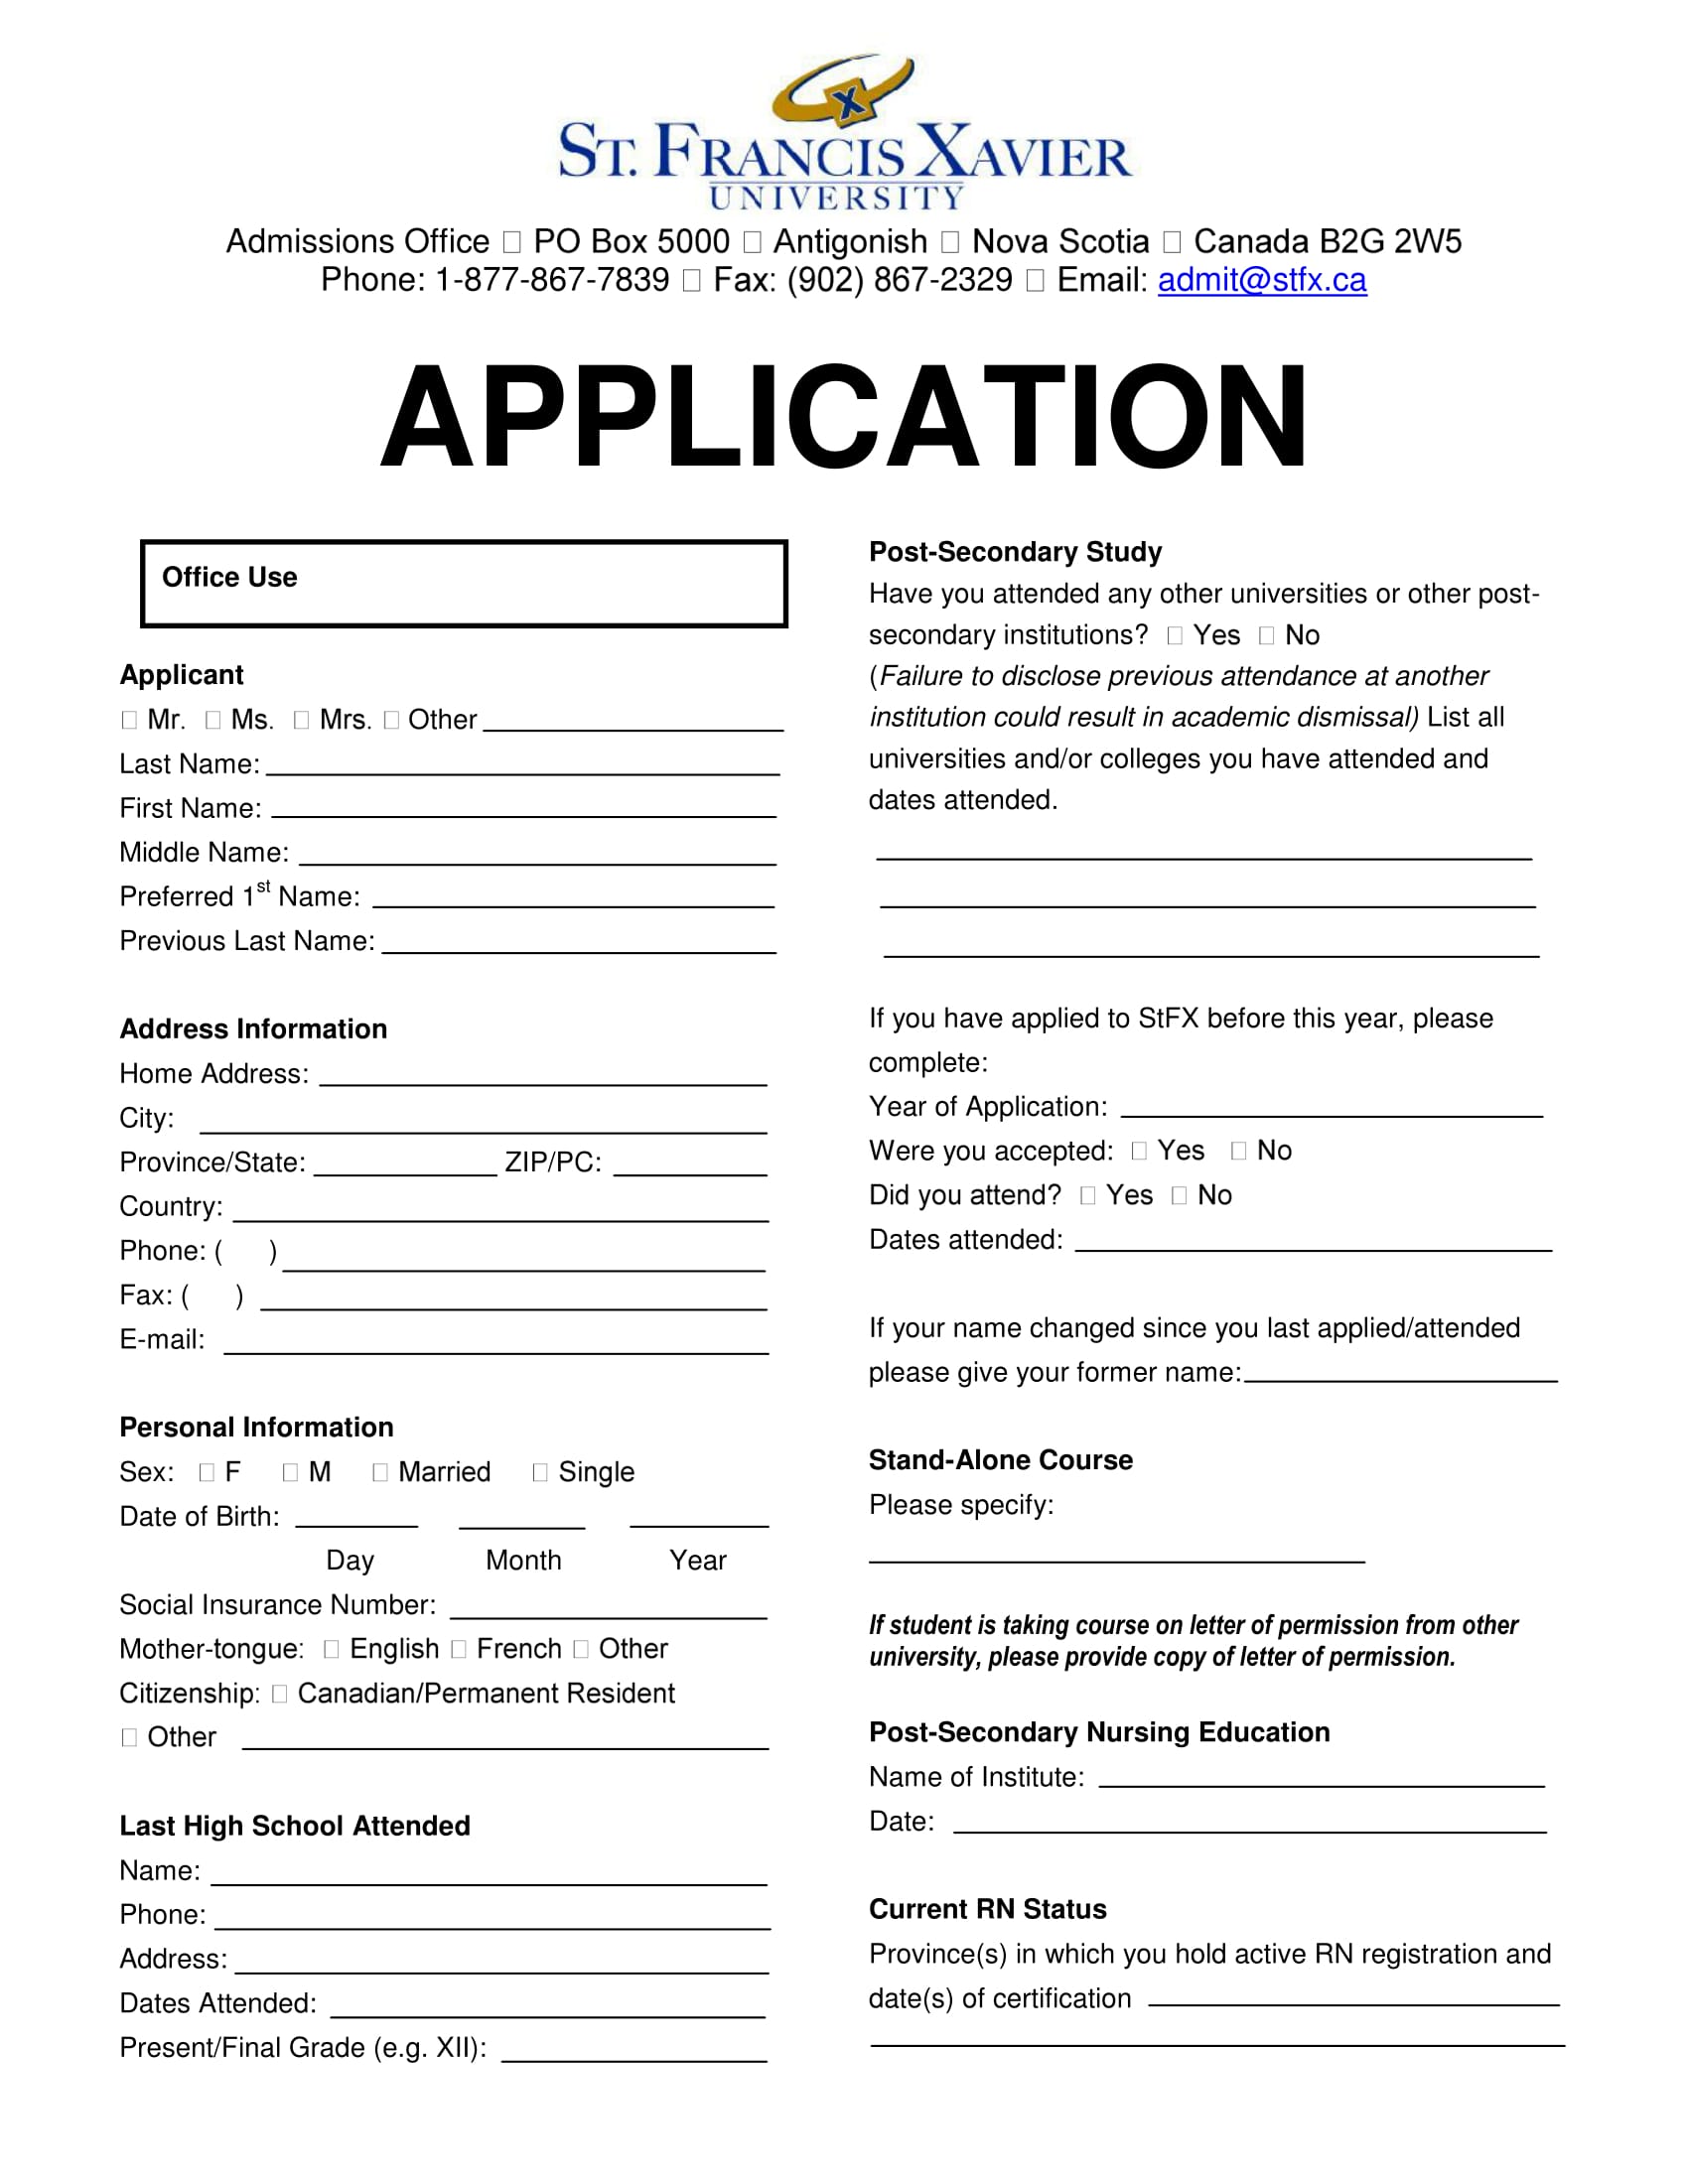 FREE 10+ Nurse Application Forms in PDF | Ms Word